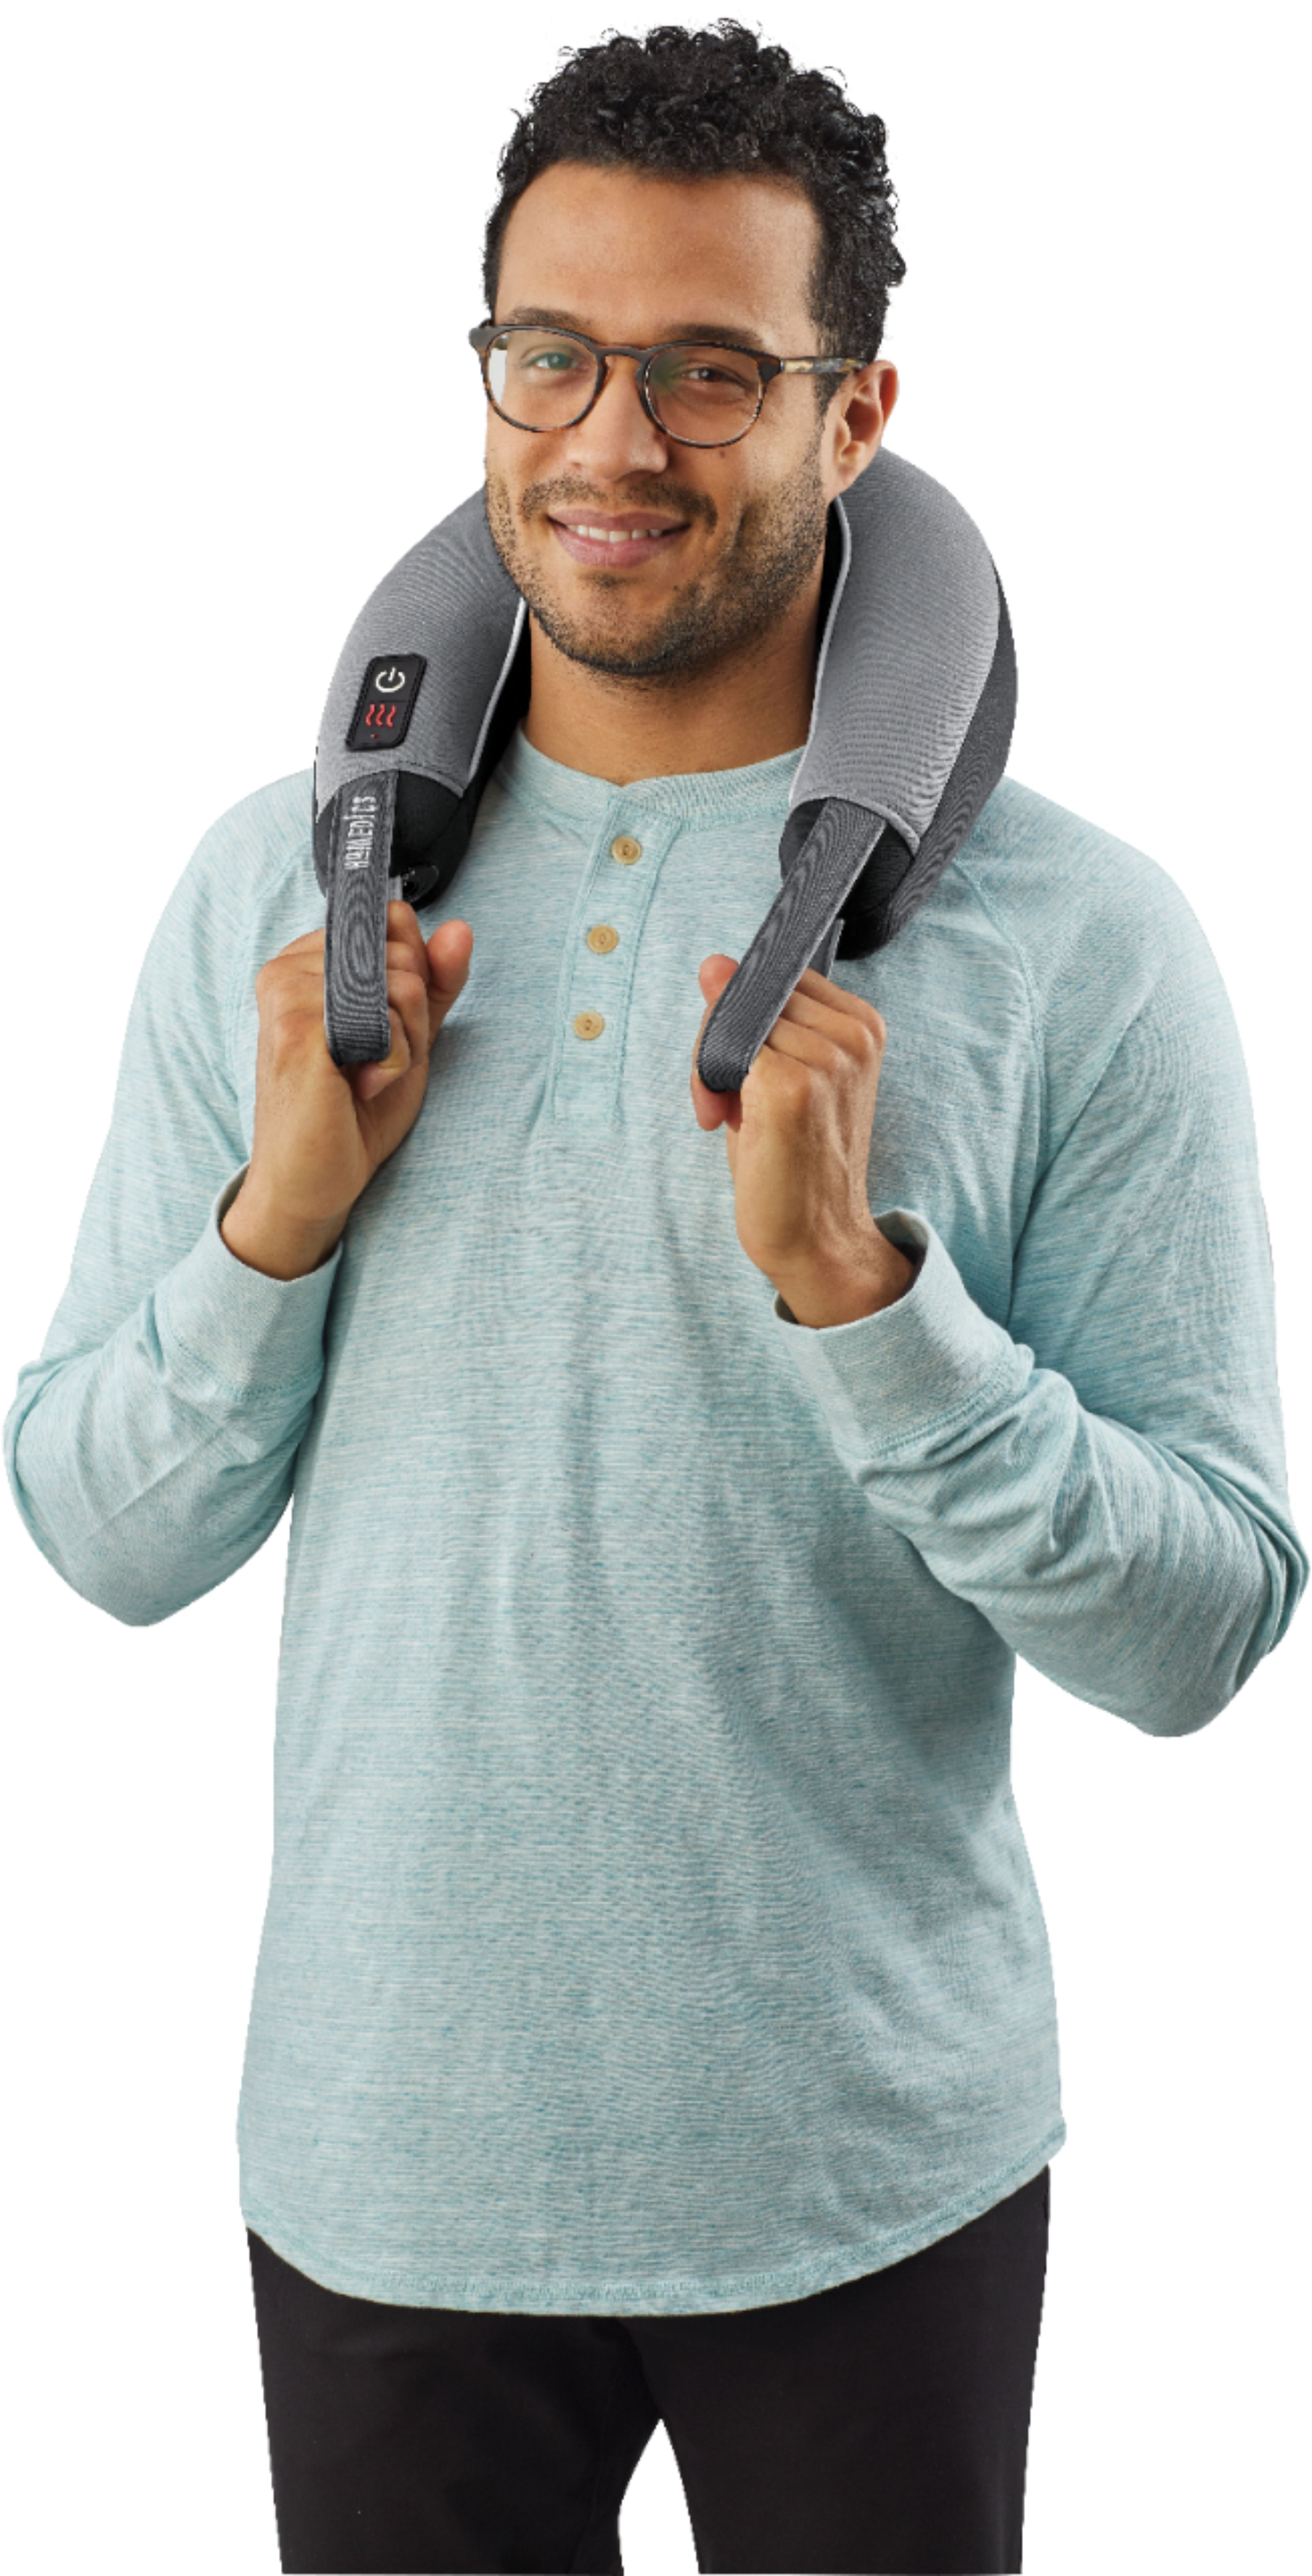 Pro Therapy Vibration Neck Massager with Soothing Heat